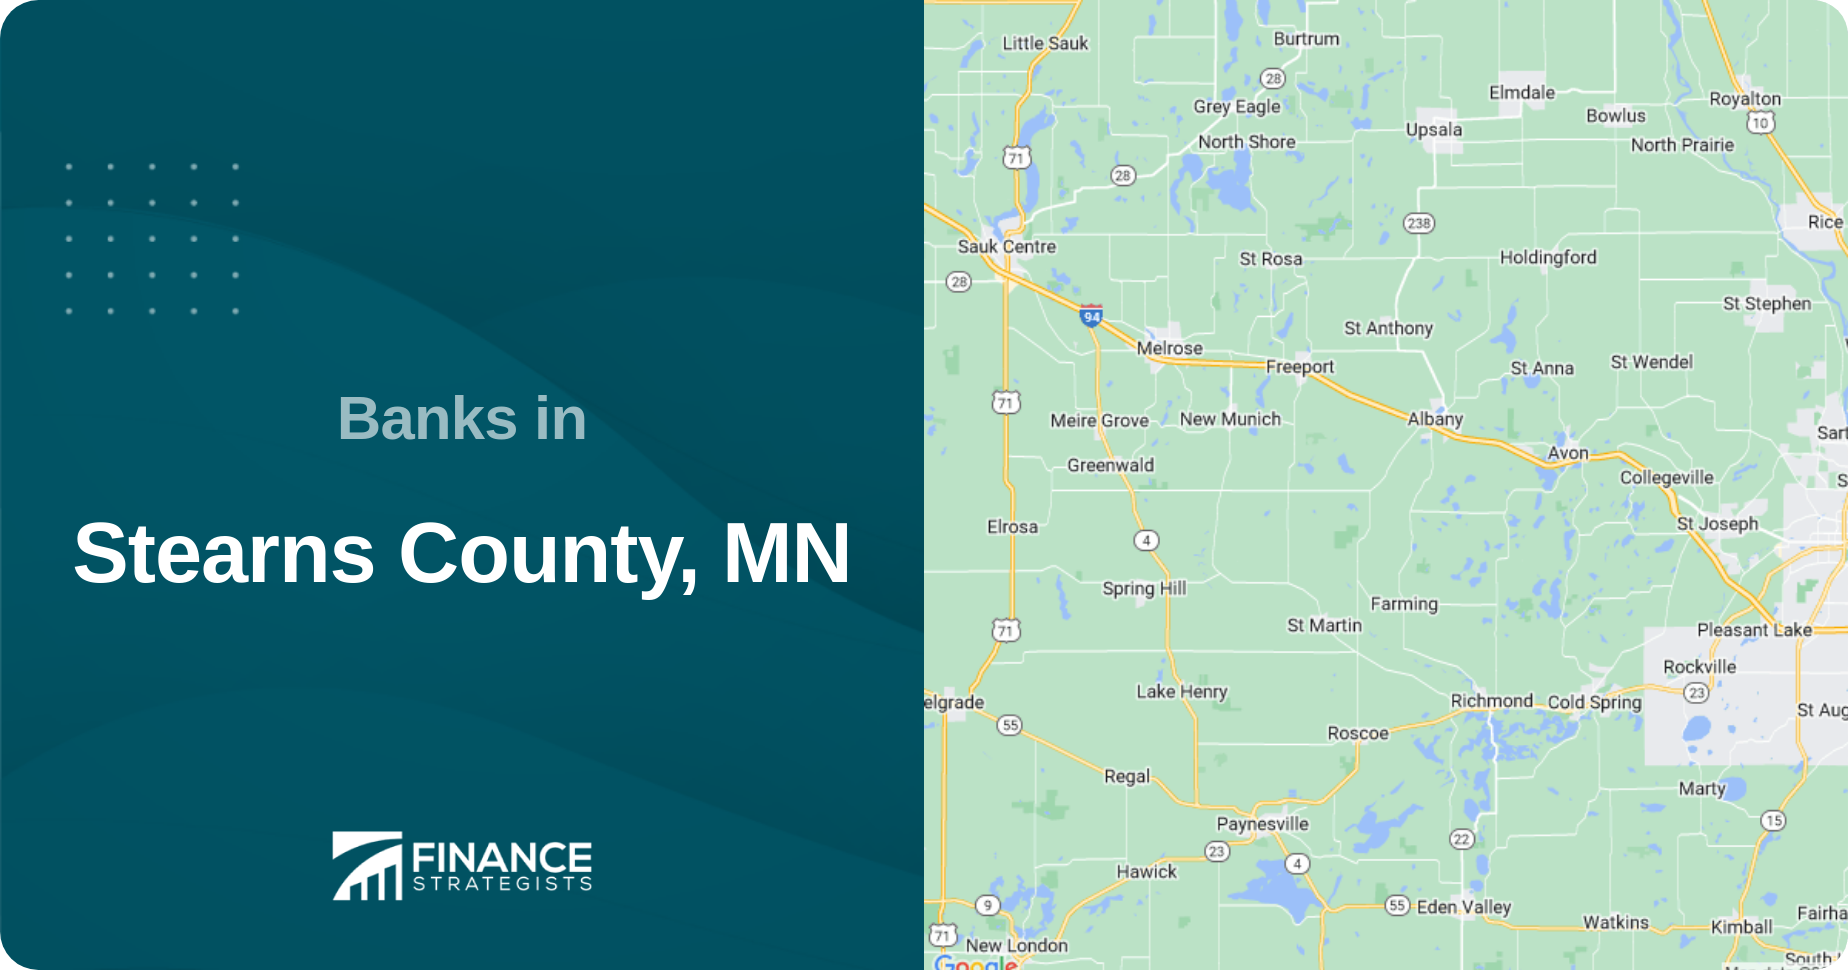 Banks in Stearns County, MN